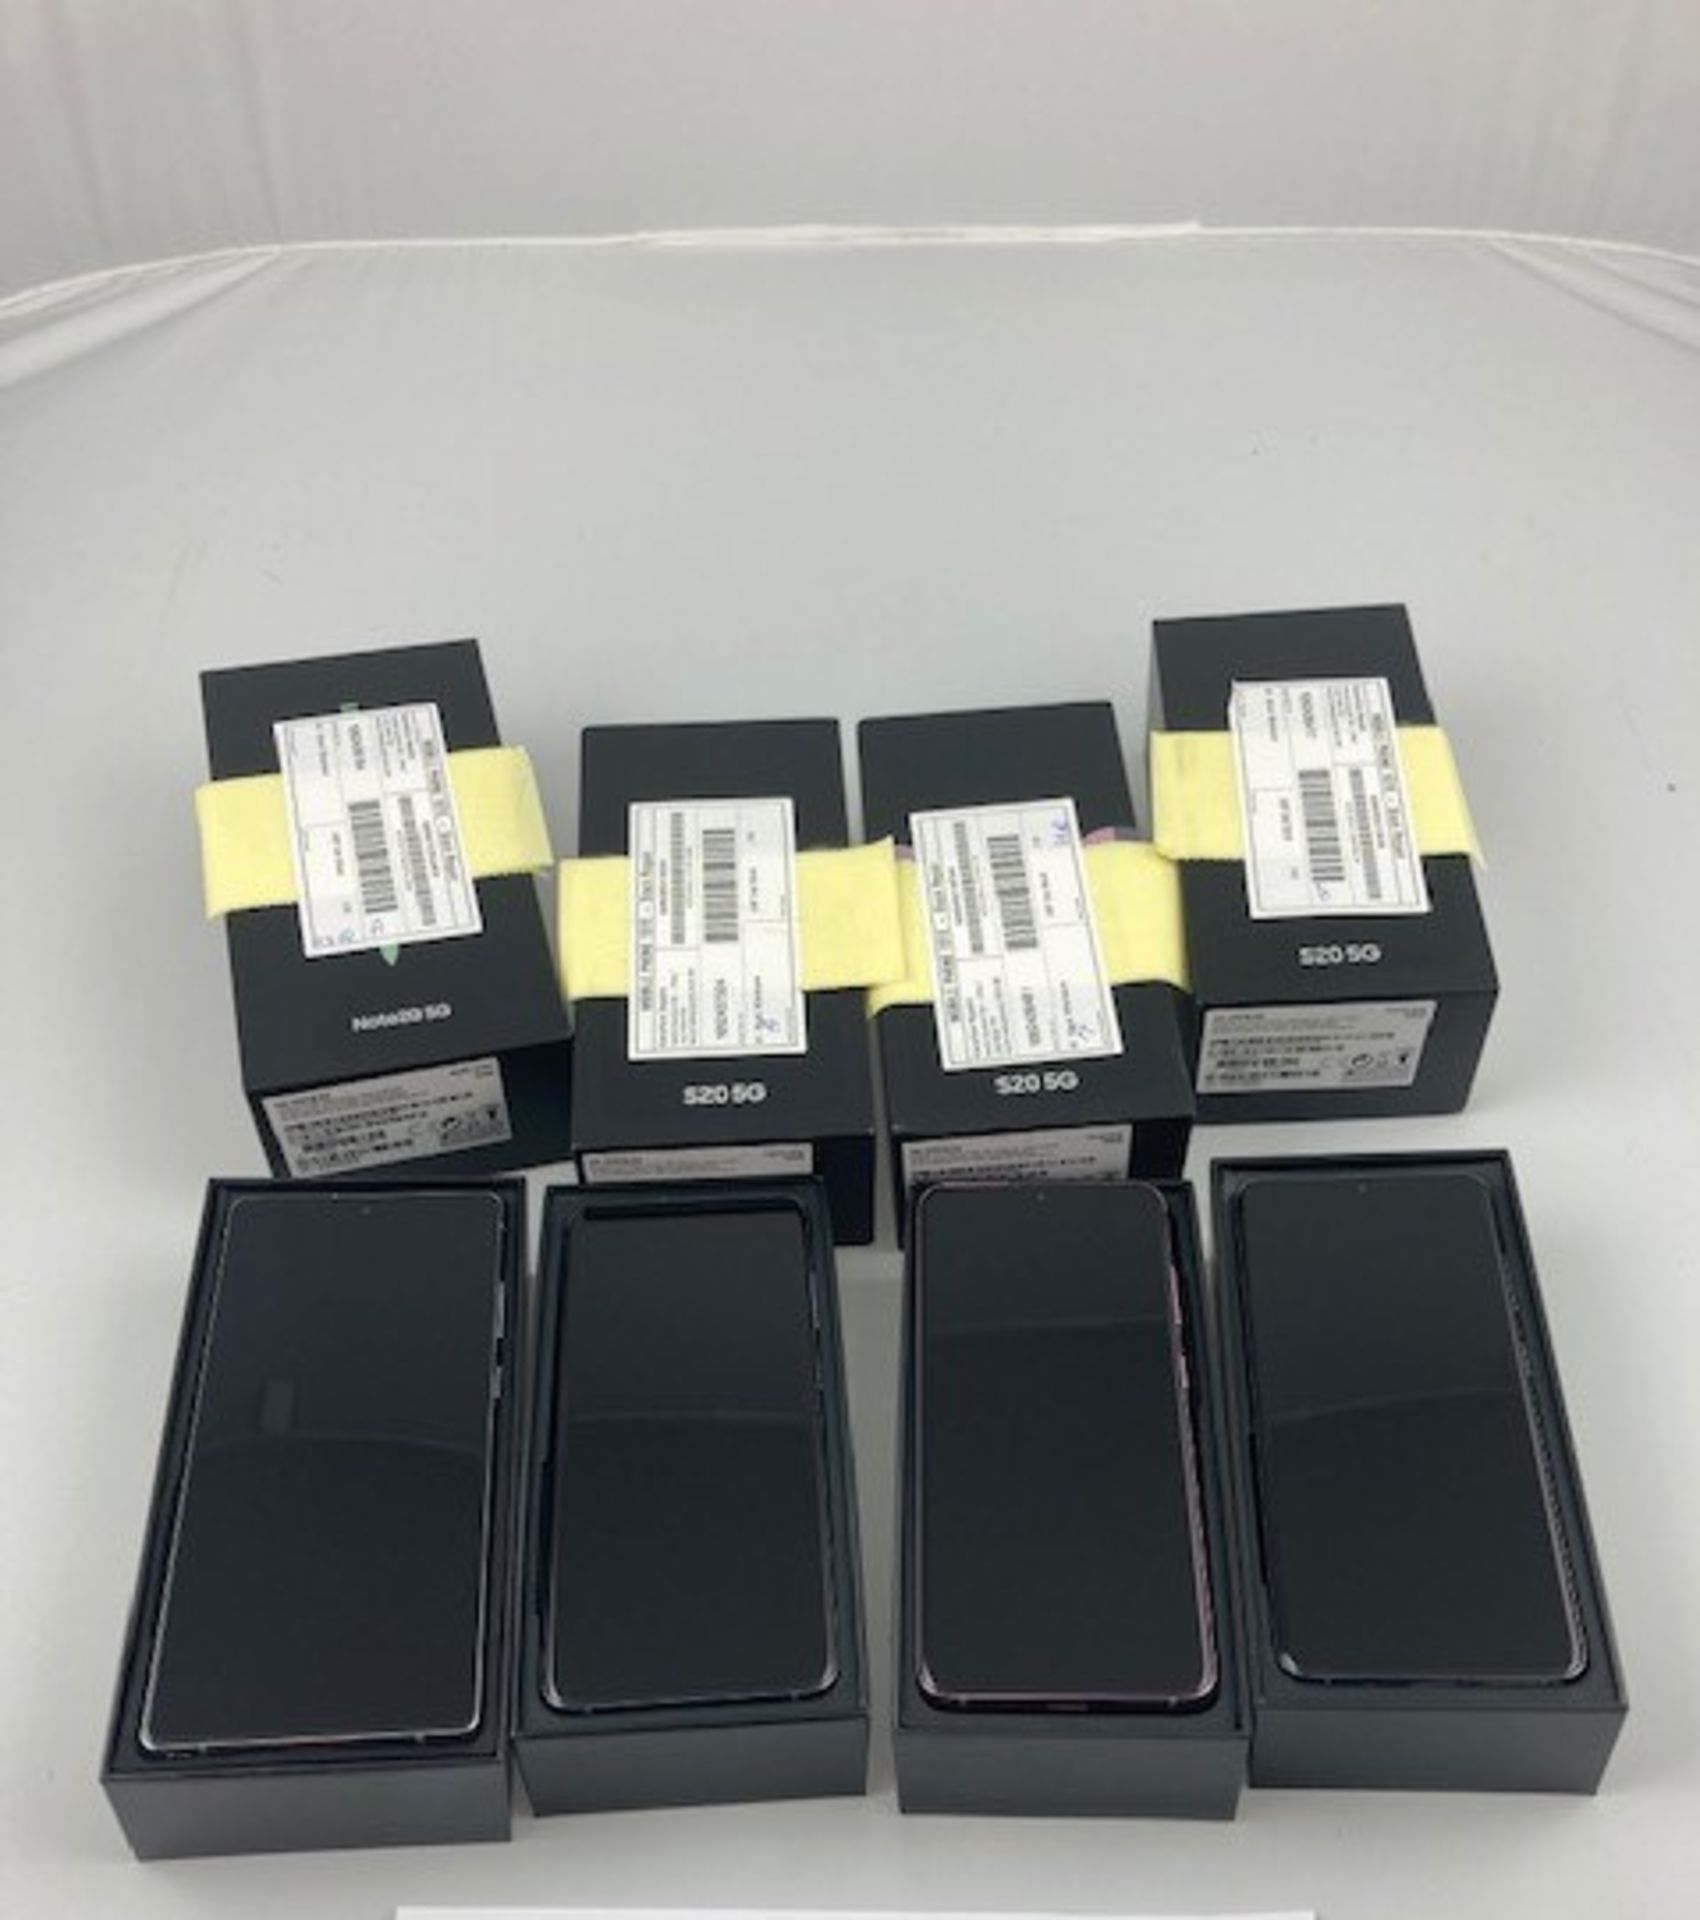 Box of 4 SAMSUNG Galaxy Handsets. Latest selling price £3646.99*